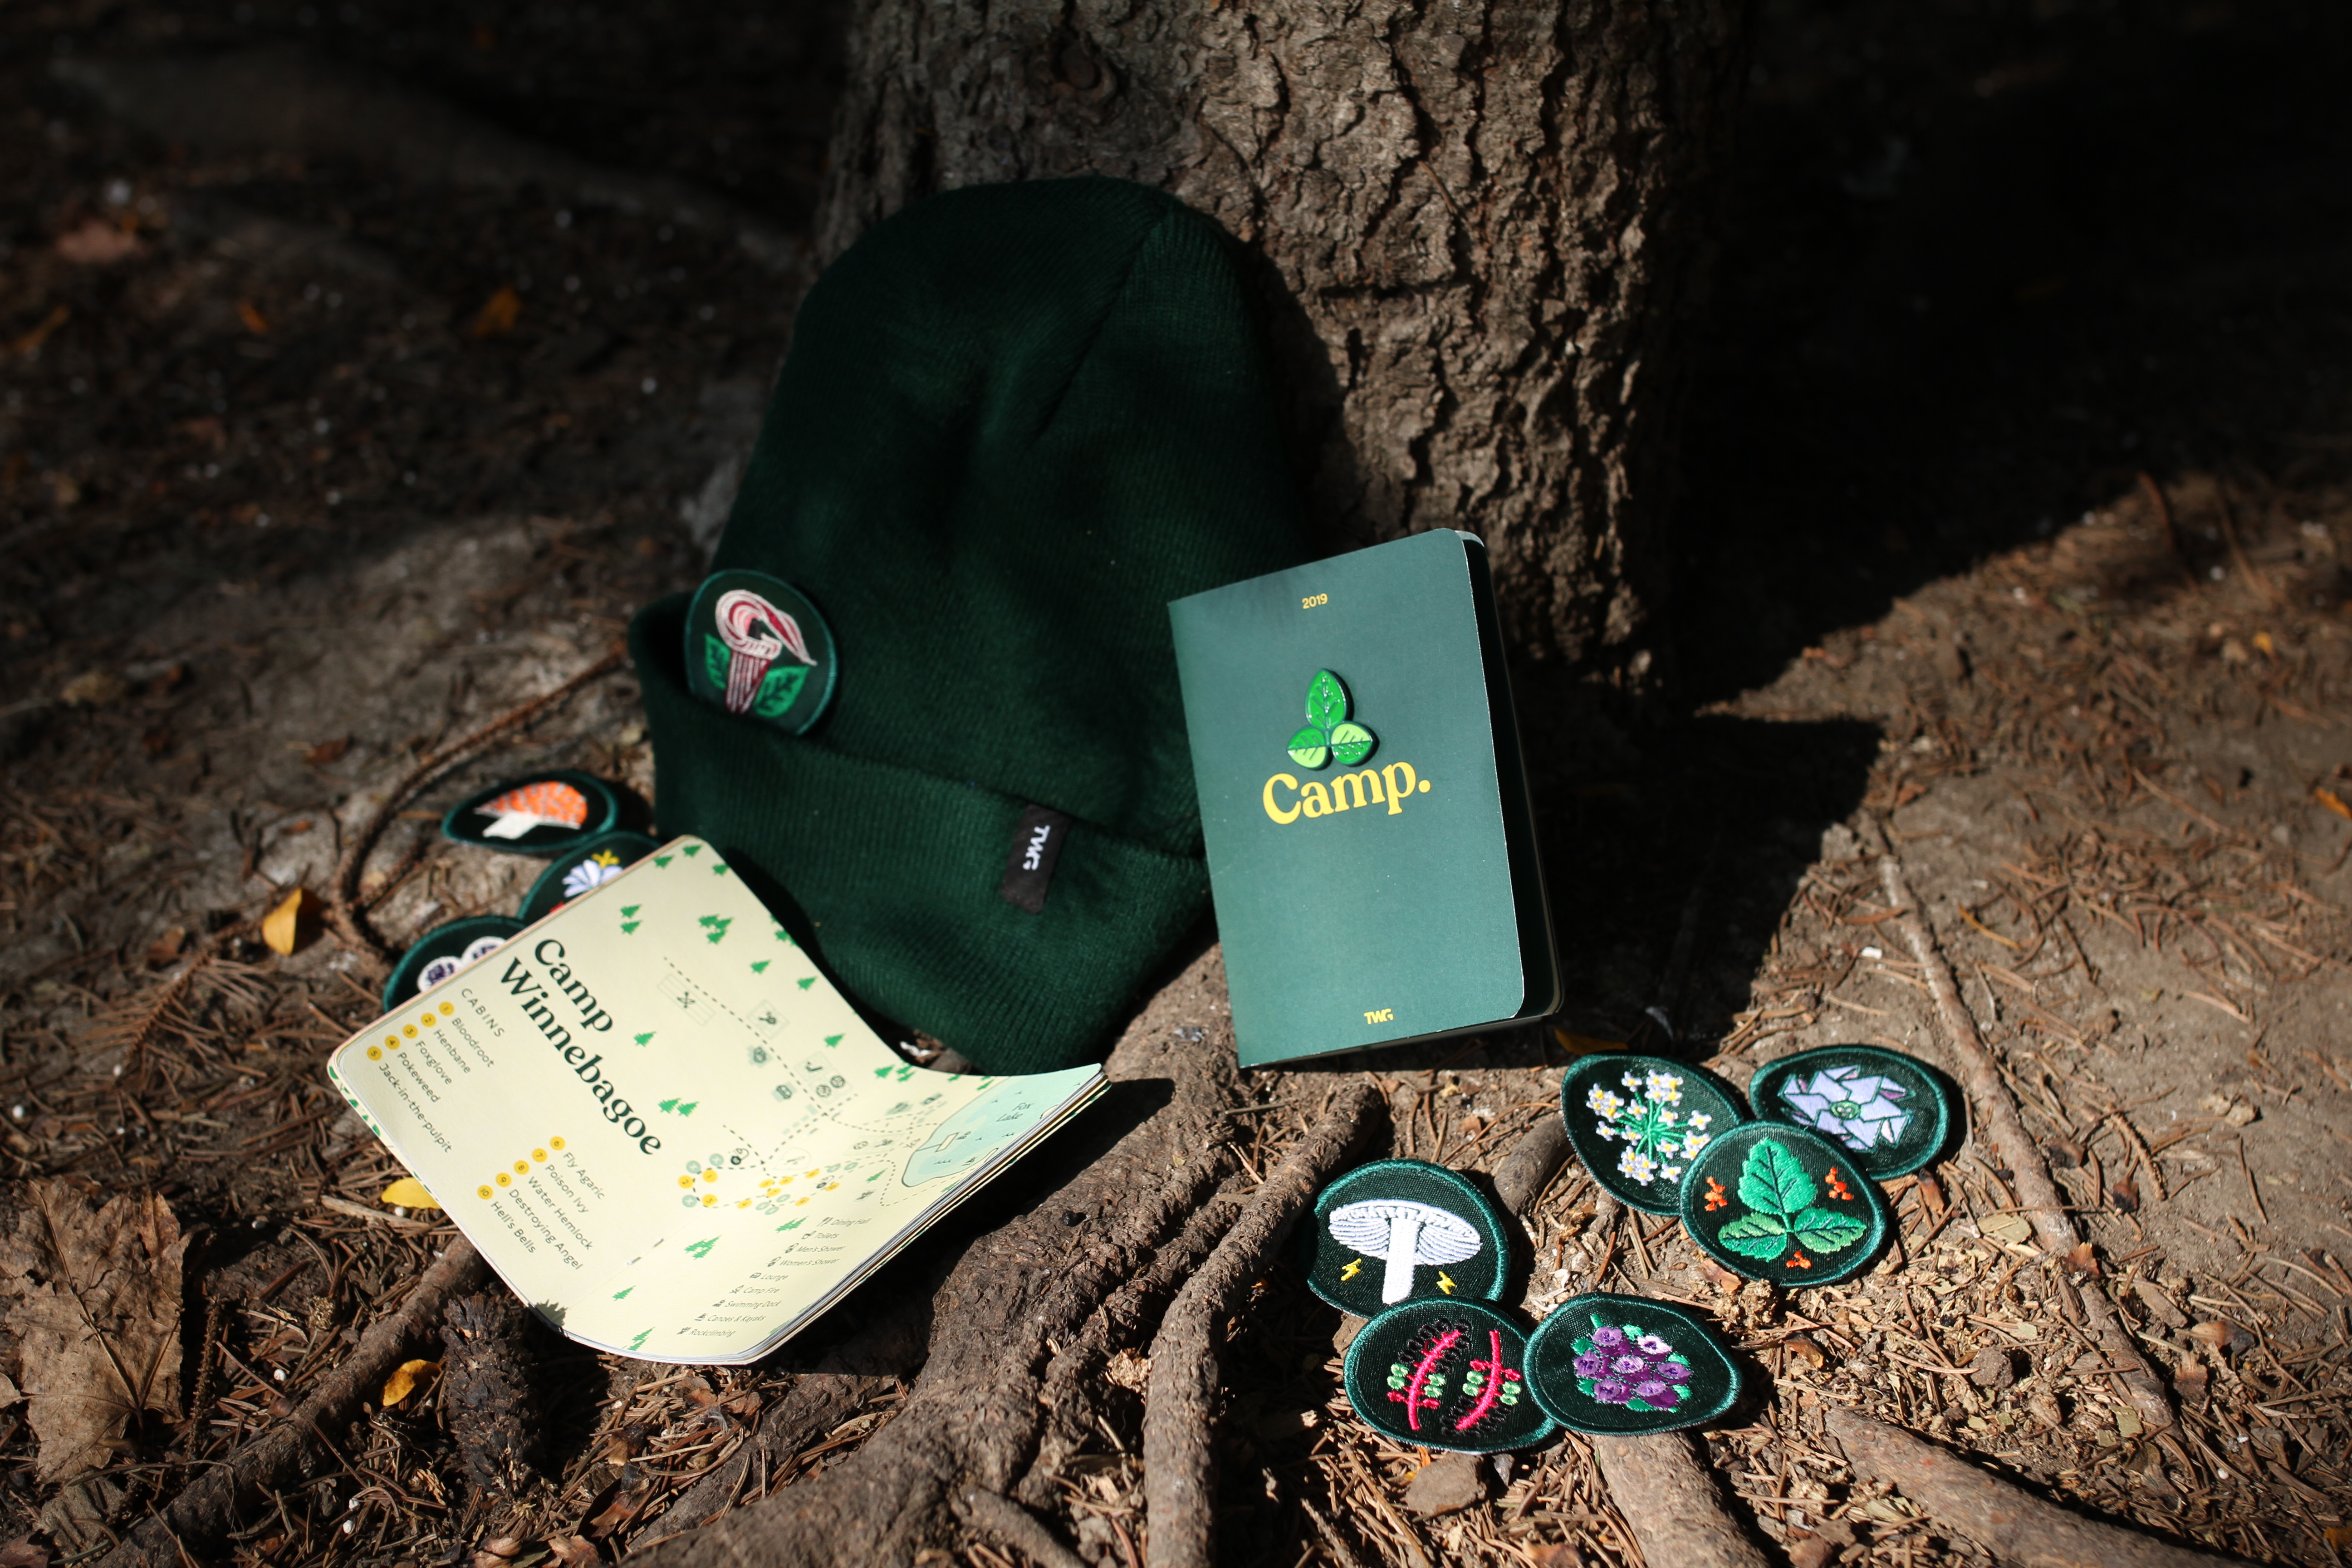 A forest green touque, a small passport sized booklet and some round embroidered patches are arranged under a tree.